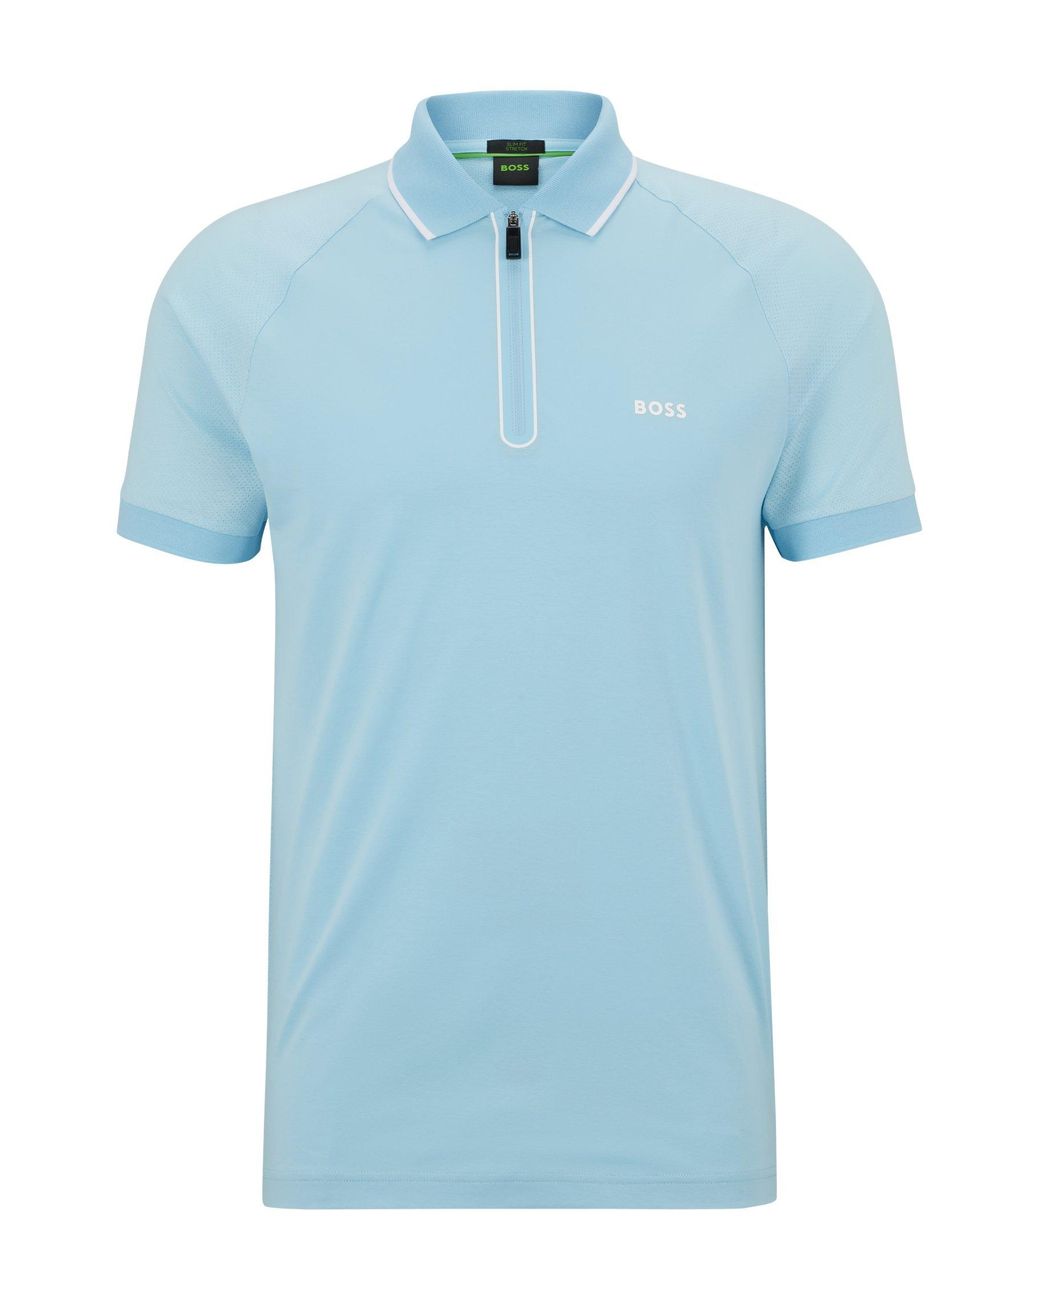 BOSS by HUGO BOSS Zip-neck Slim-fit Polo Shirt In Stretch Cotton in Blue  for Men | Lyst Australia